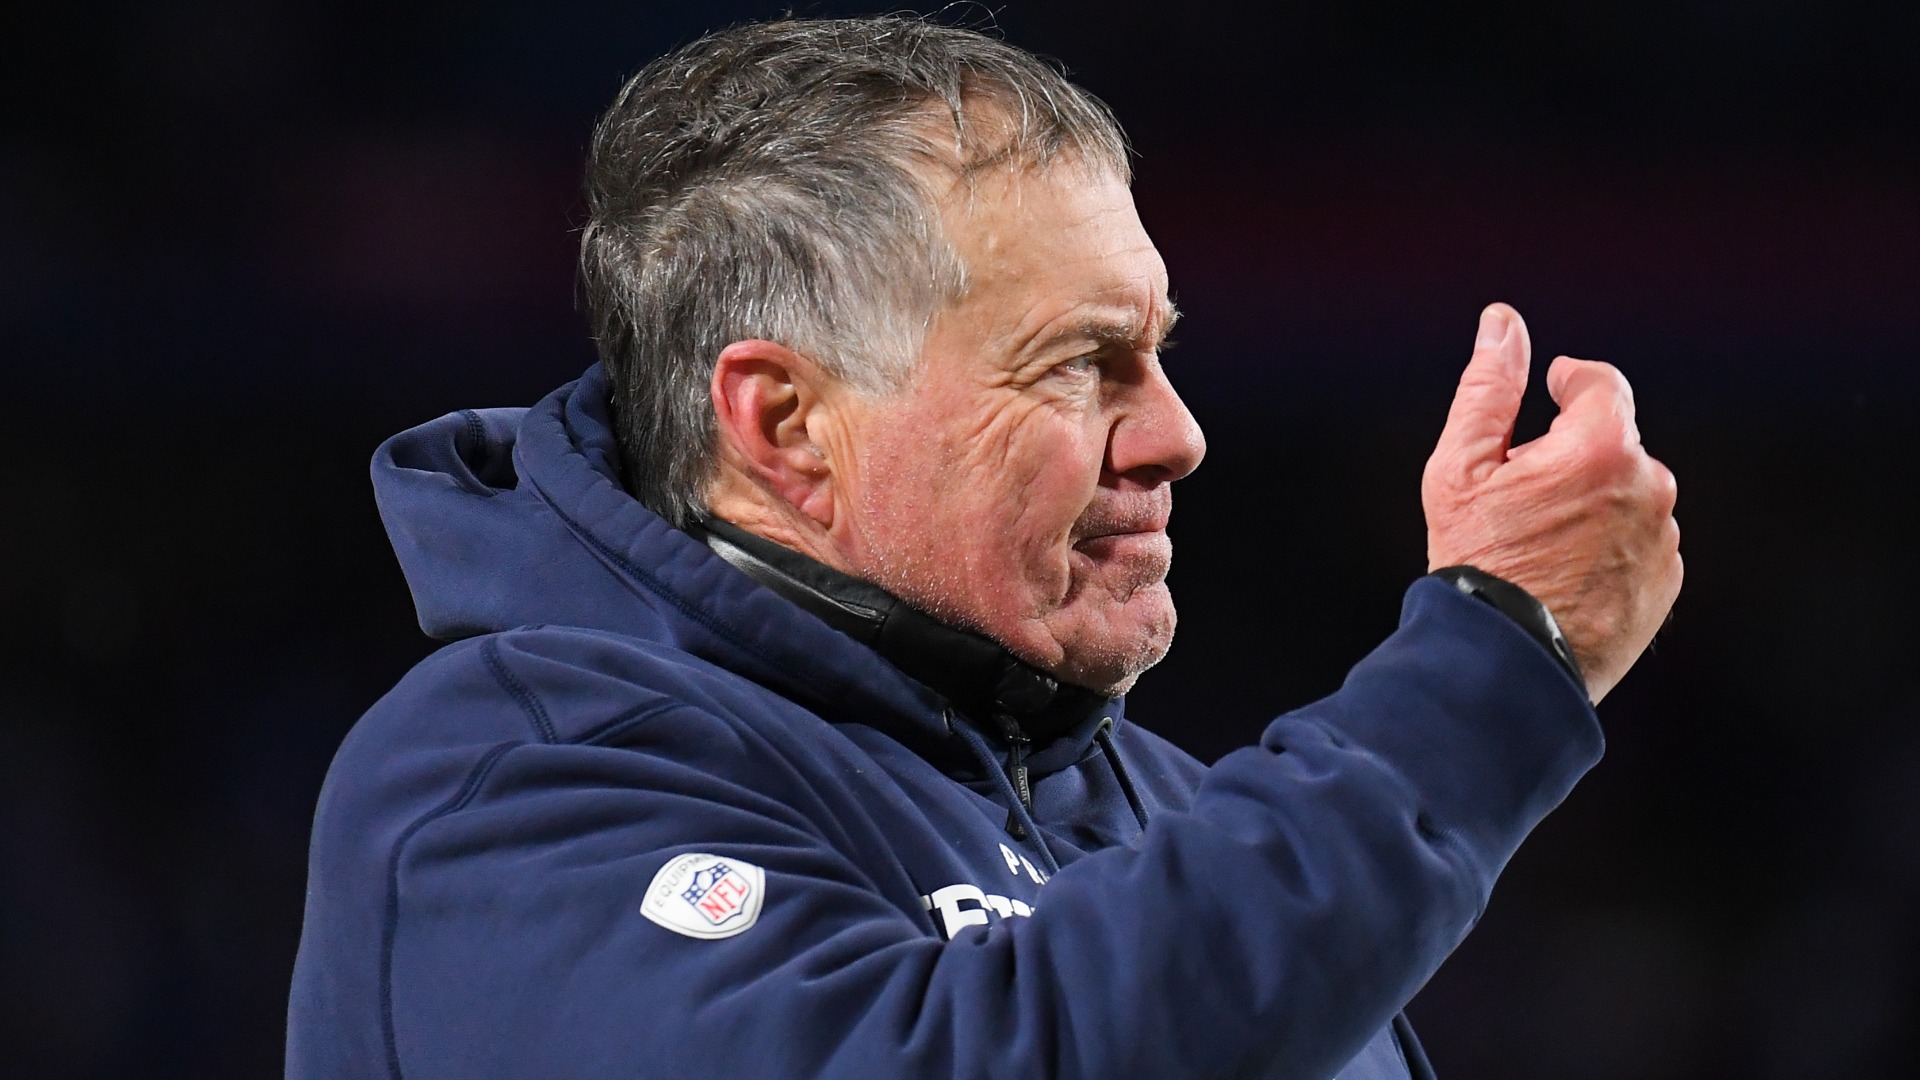 NFL Prospect tells the amazing story of Bill Belichick from the Shrine Bowl